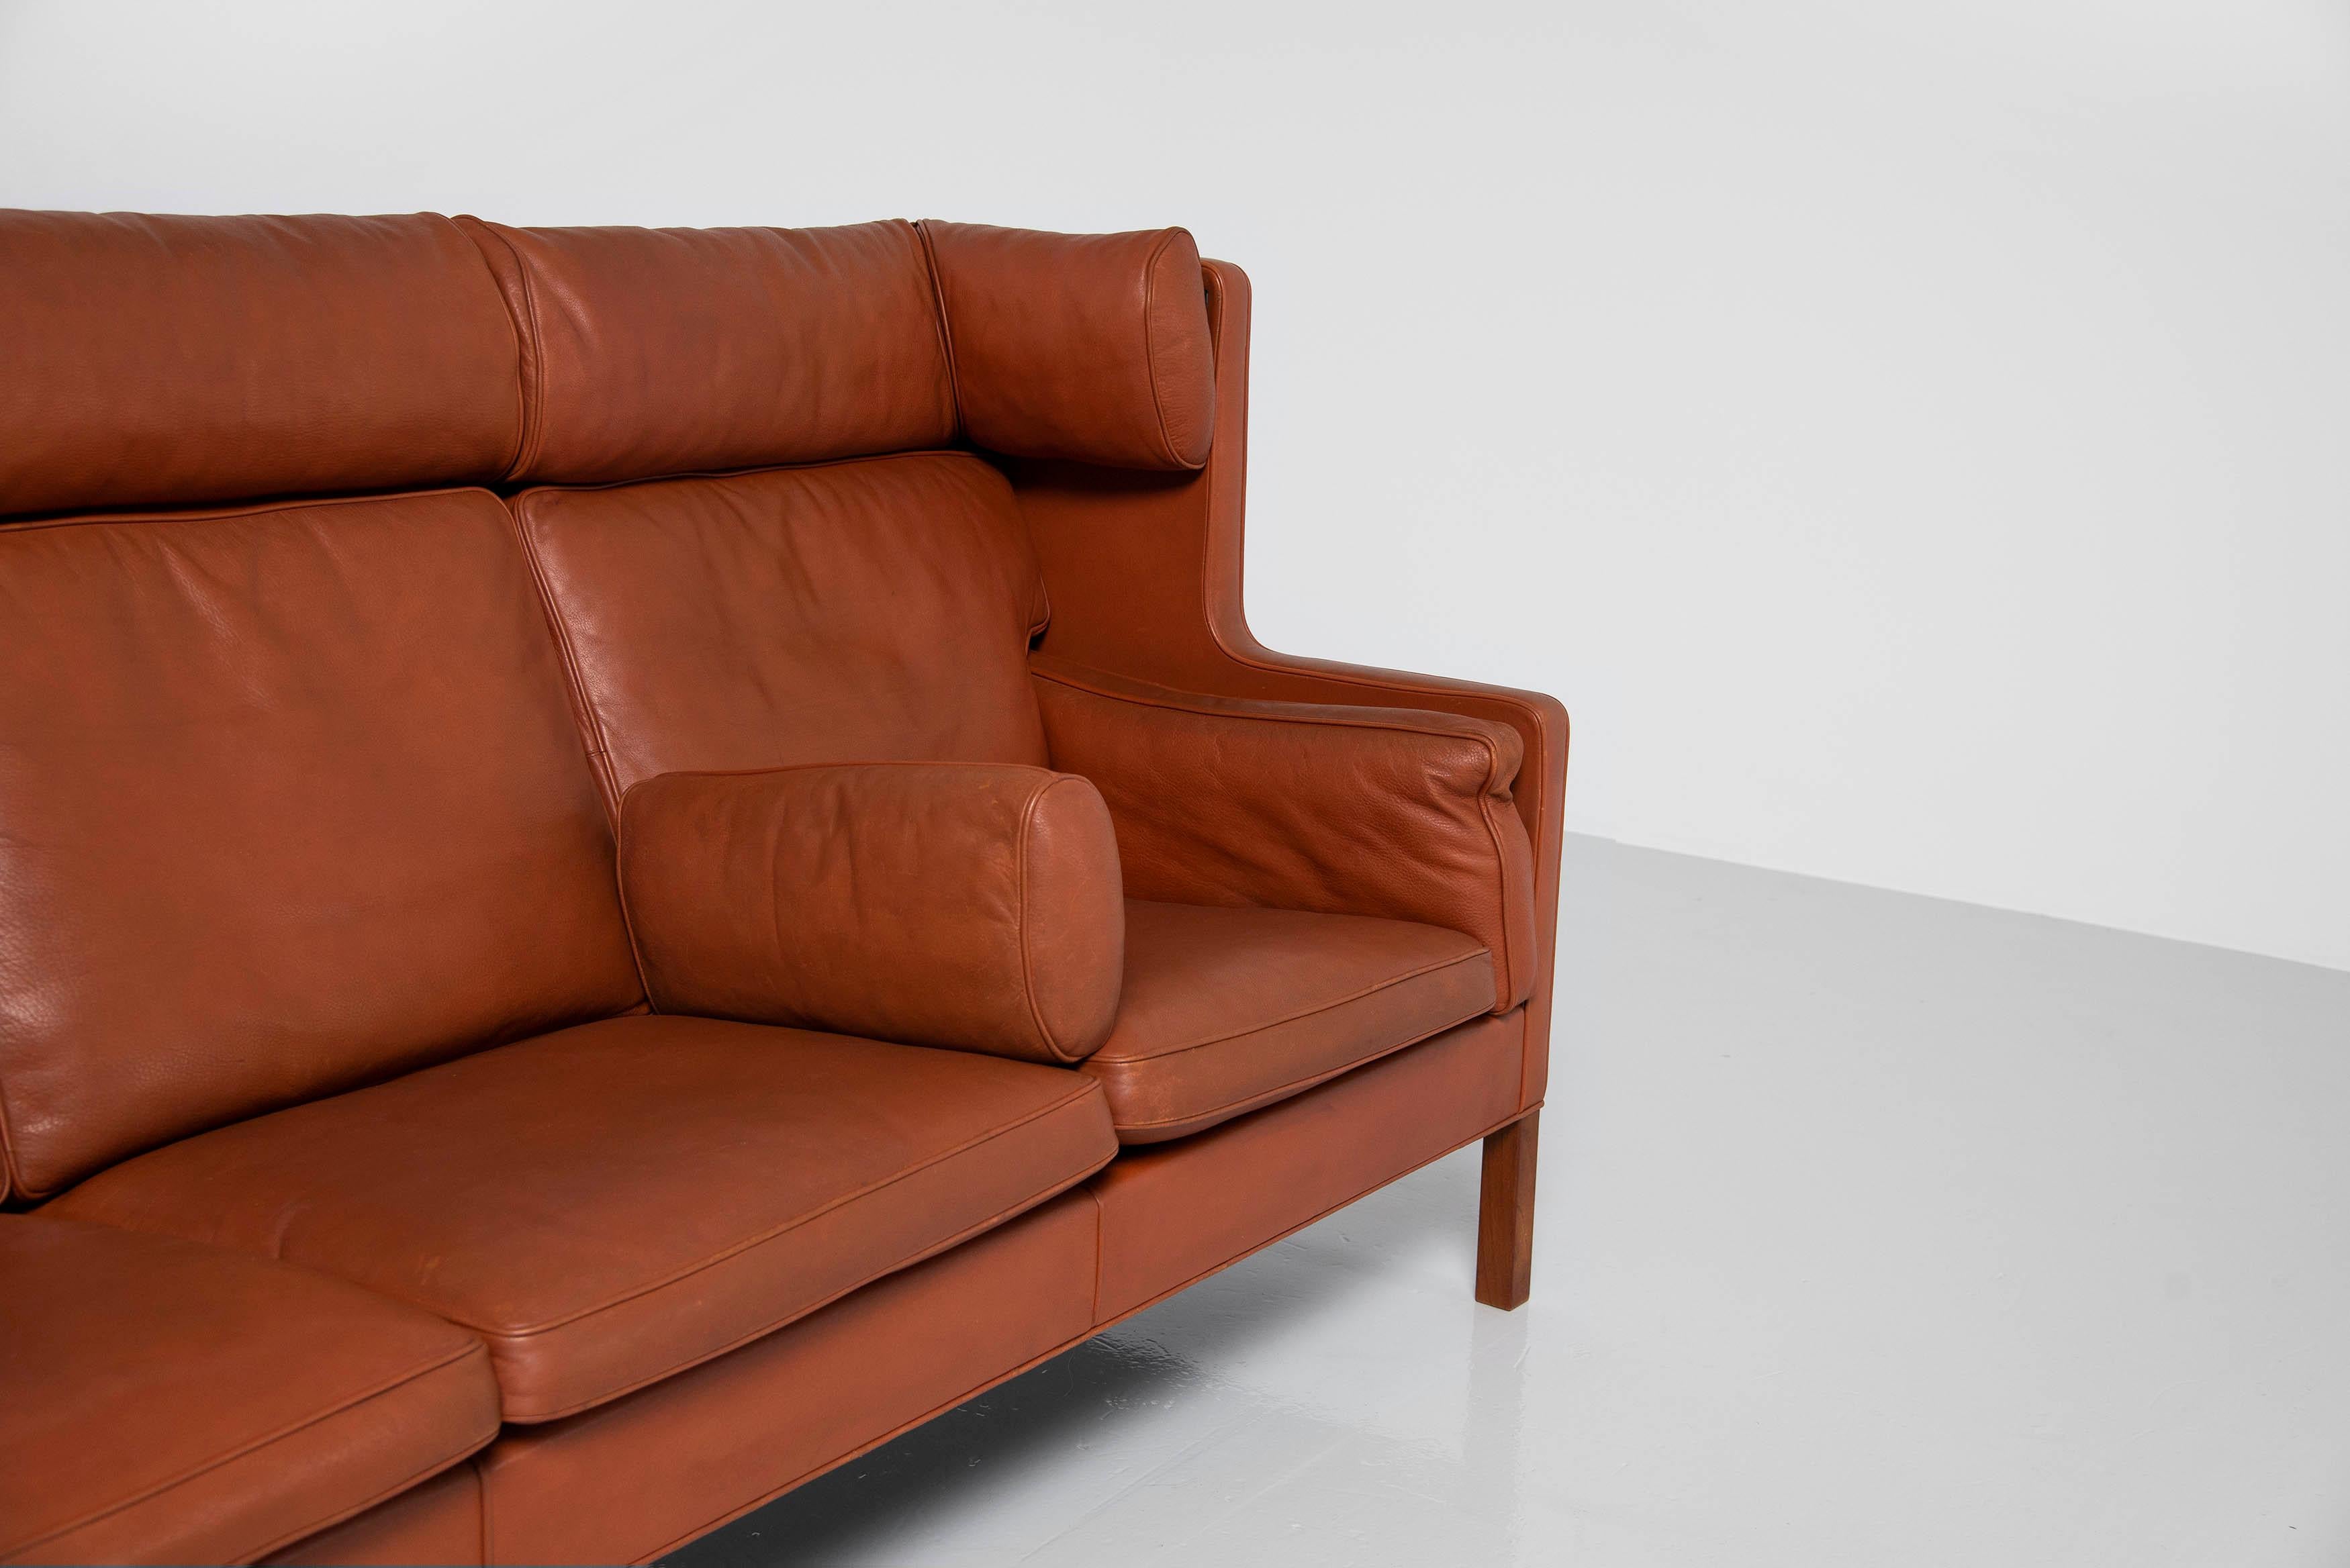 Stunning wingback sofa model 2193 designed by Borge Mogensen and manufactured by Fredericia Stolefabrik, Denmark 1965. This sofa has solid teak wooden legs and beautiful cognac leather with minimal patina from age and usage. The sofa has nice bent